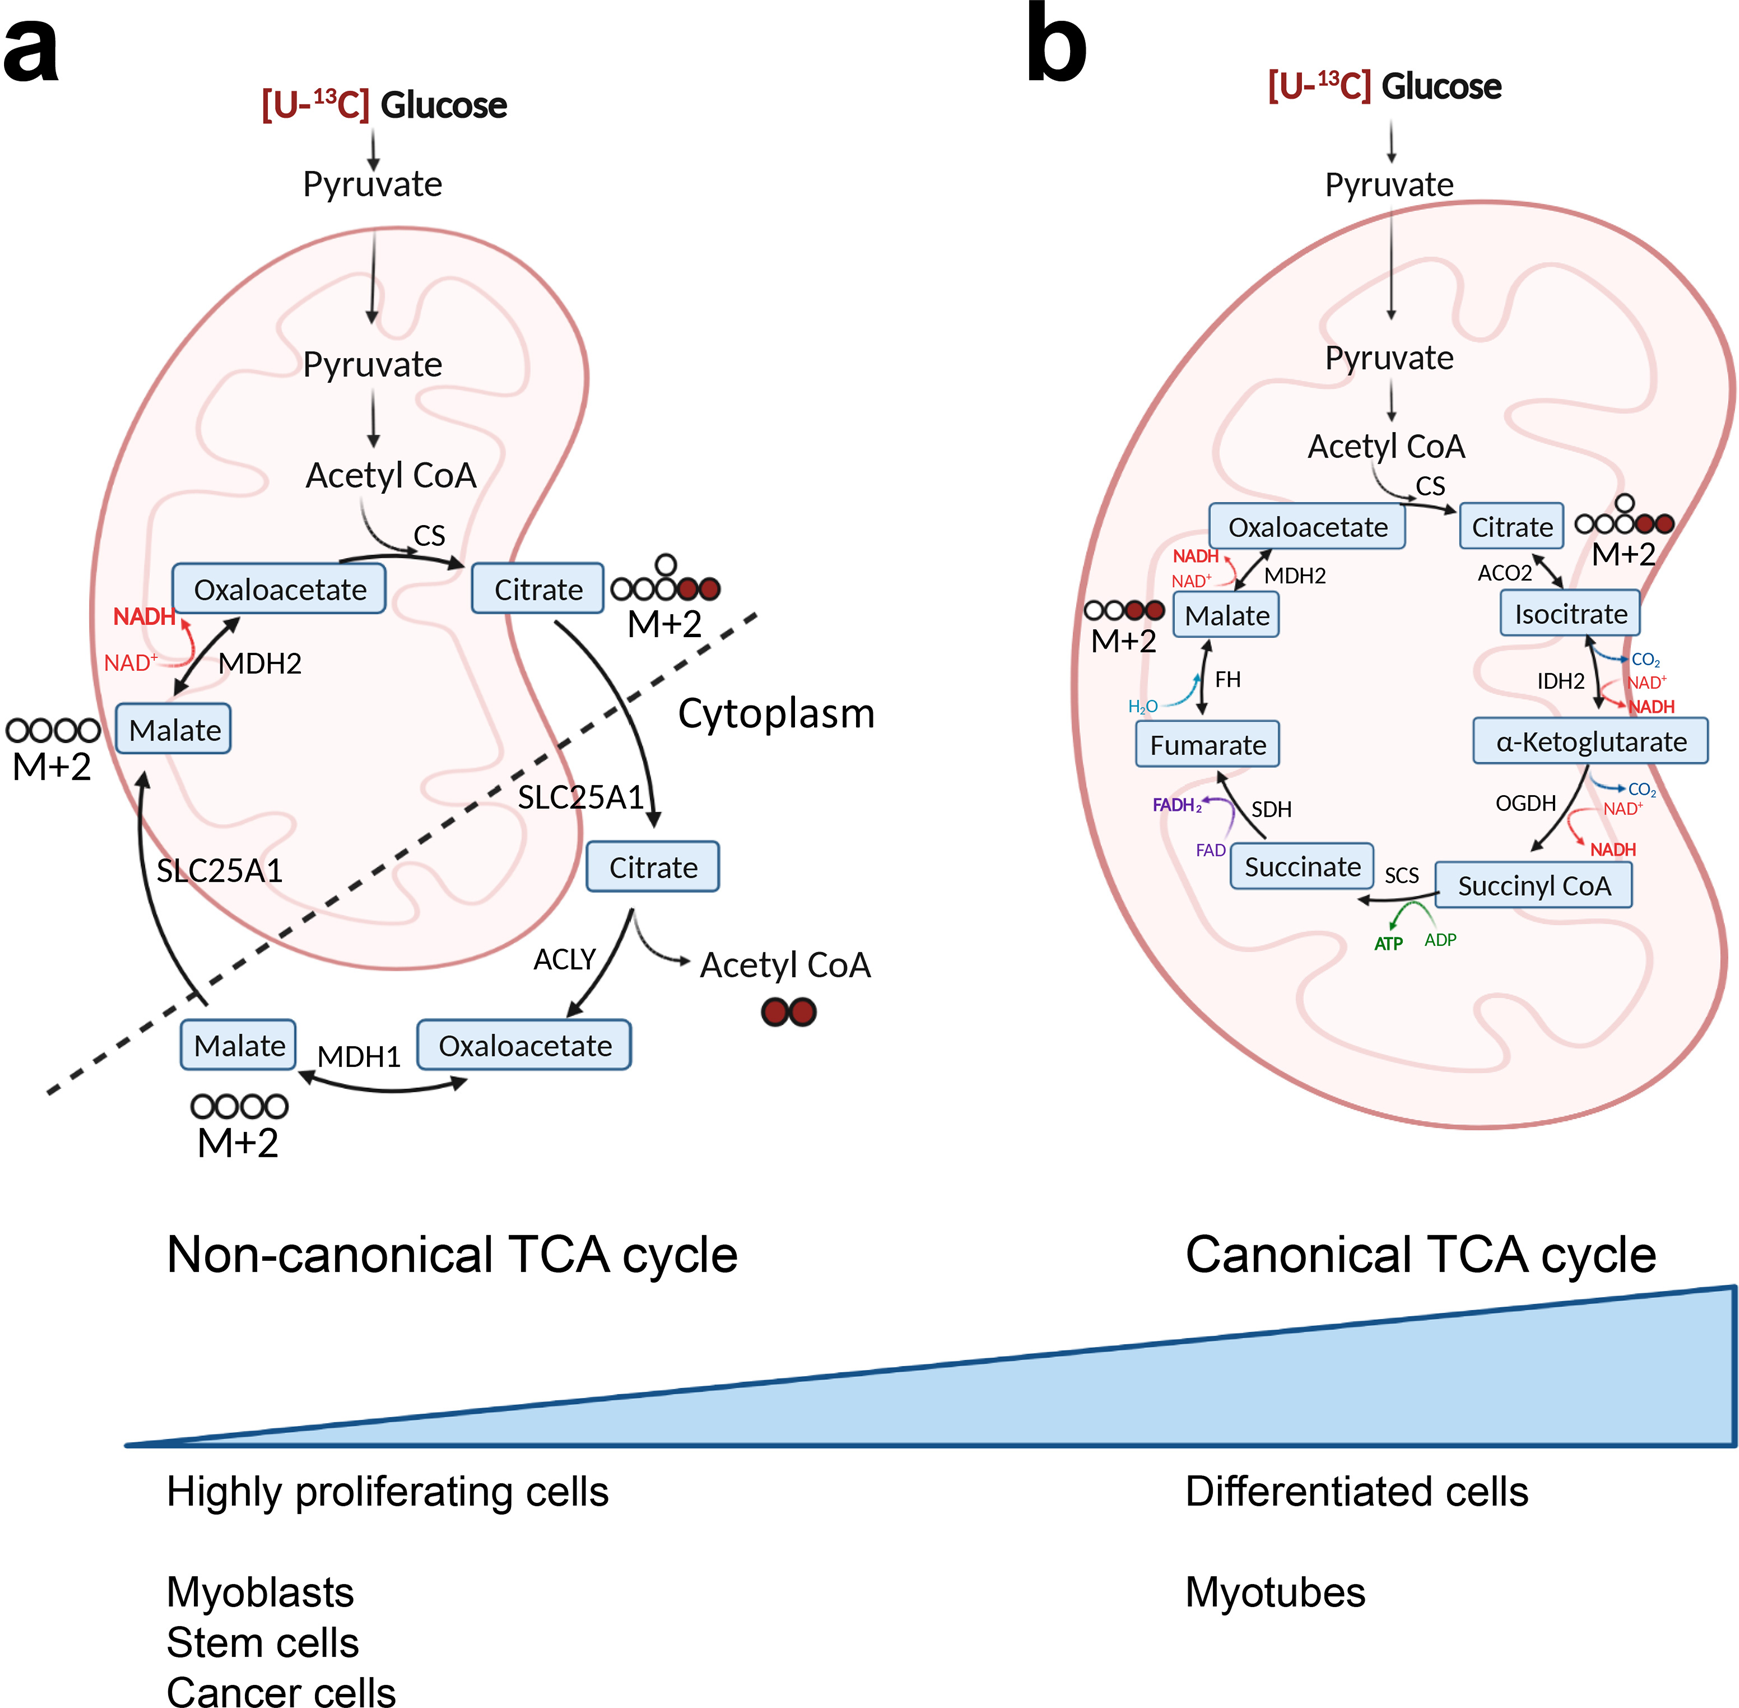 Light shed on a non-canonical TCA cycle: cell state regulation